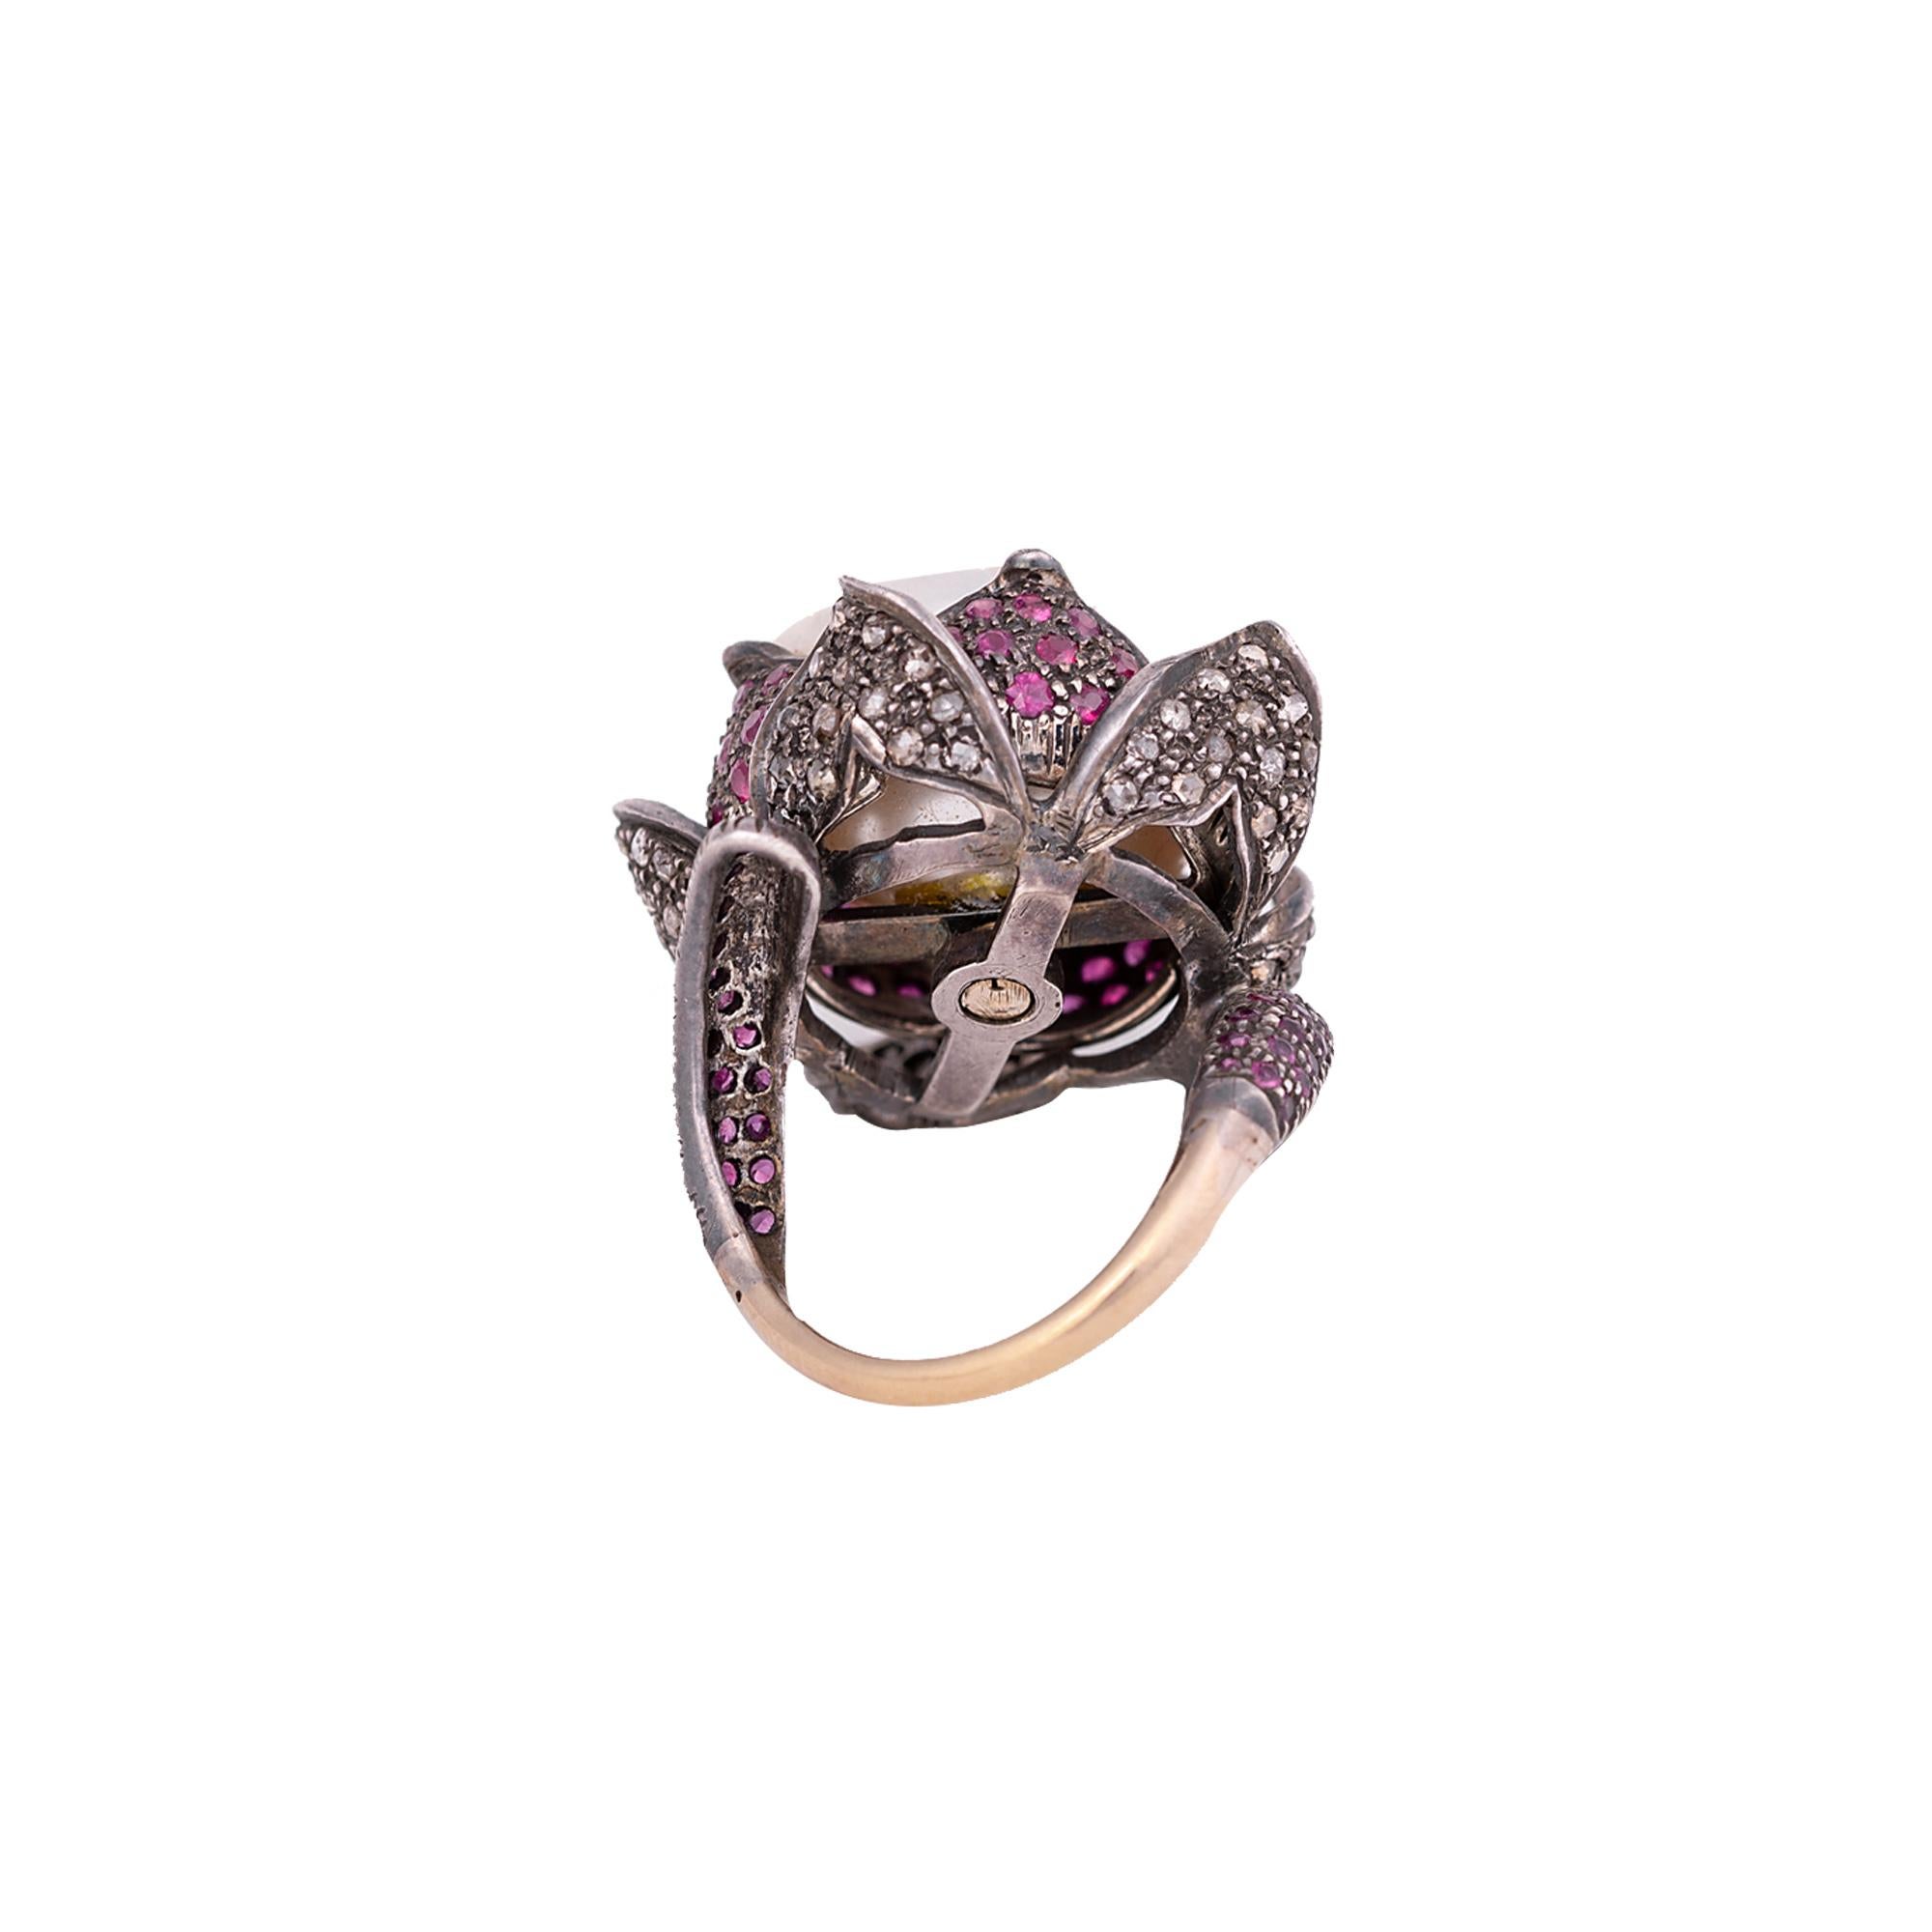 Women's Diamond, Pearl, and Ruby Cocktail Flower Ring in Art-Deco Style